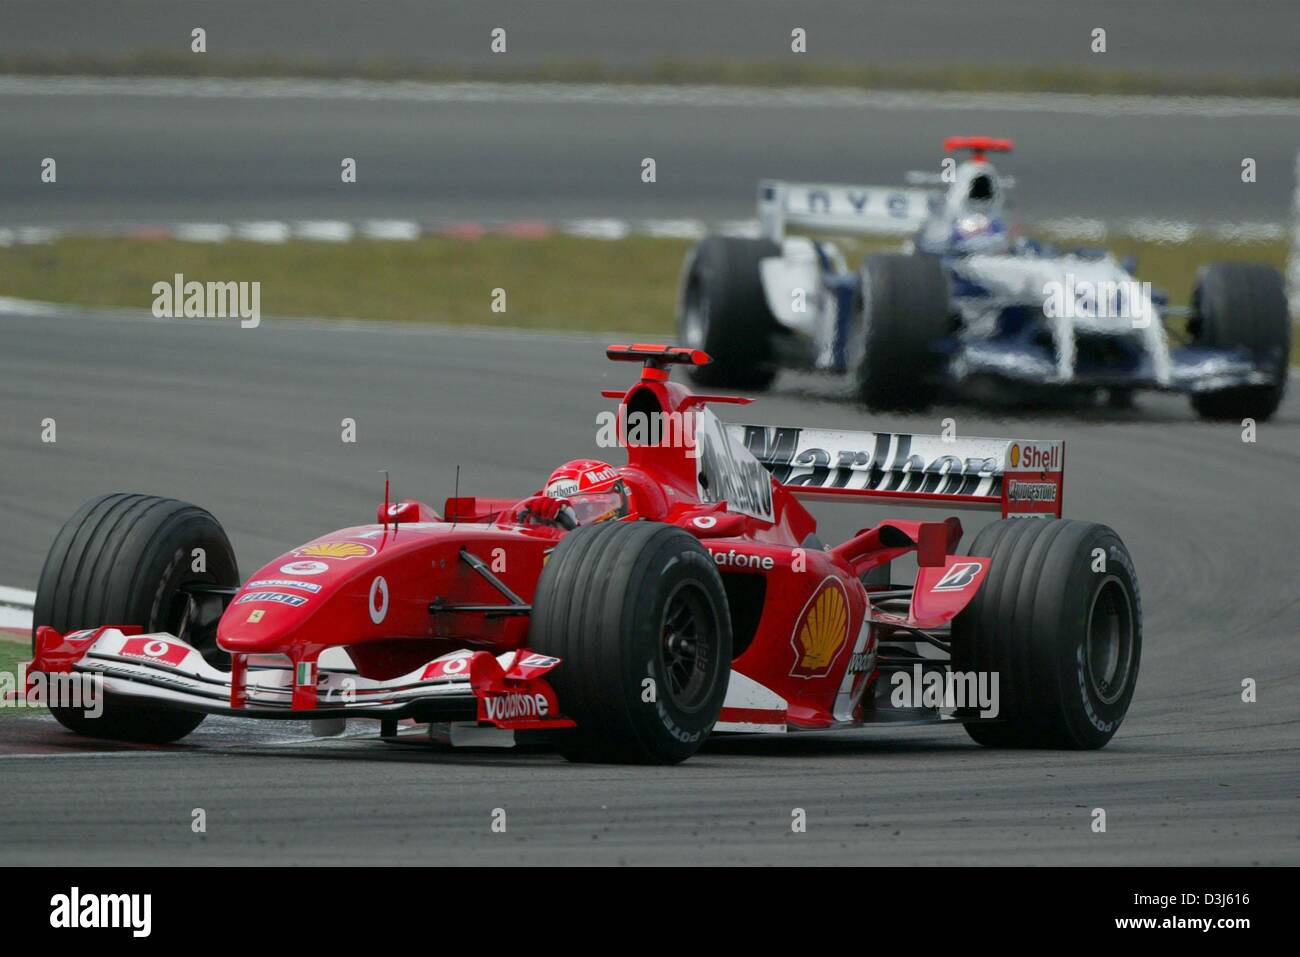 (dpa) - German Formula 1 champion Michael Schumacher (team Ferrari) drives in front of his Columbian rival Juan Pablo Montoya (team BMW-Williams) during the European Grand Prix at the Nuerburgring in Germany, 30 May 2004. Schumacher went on to win the race. Stock Photo